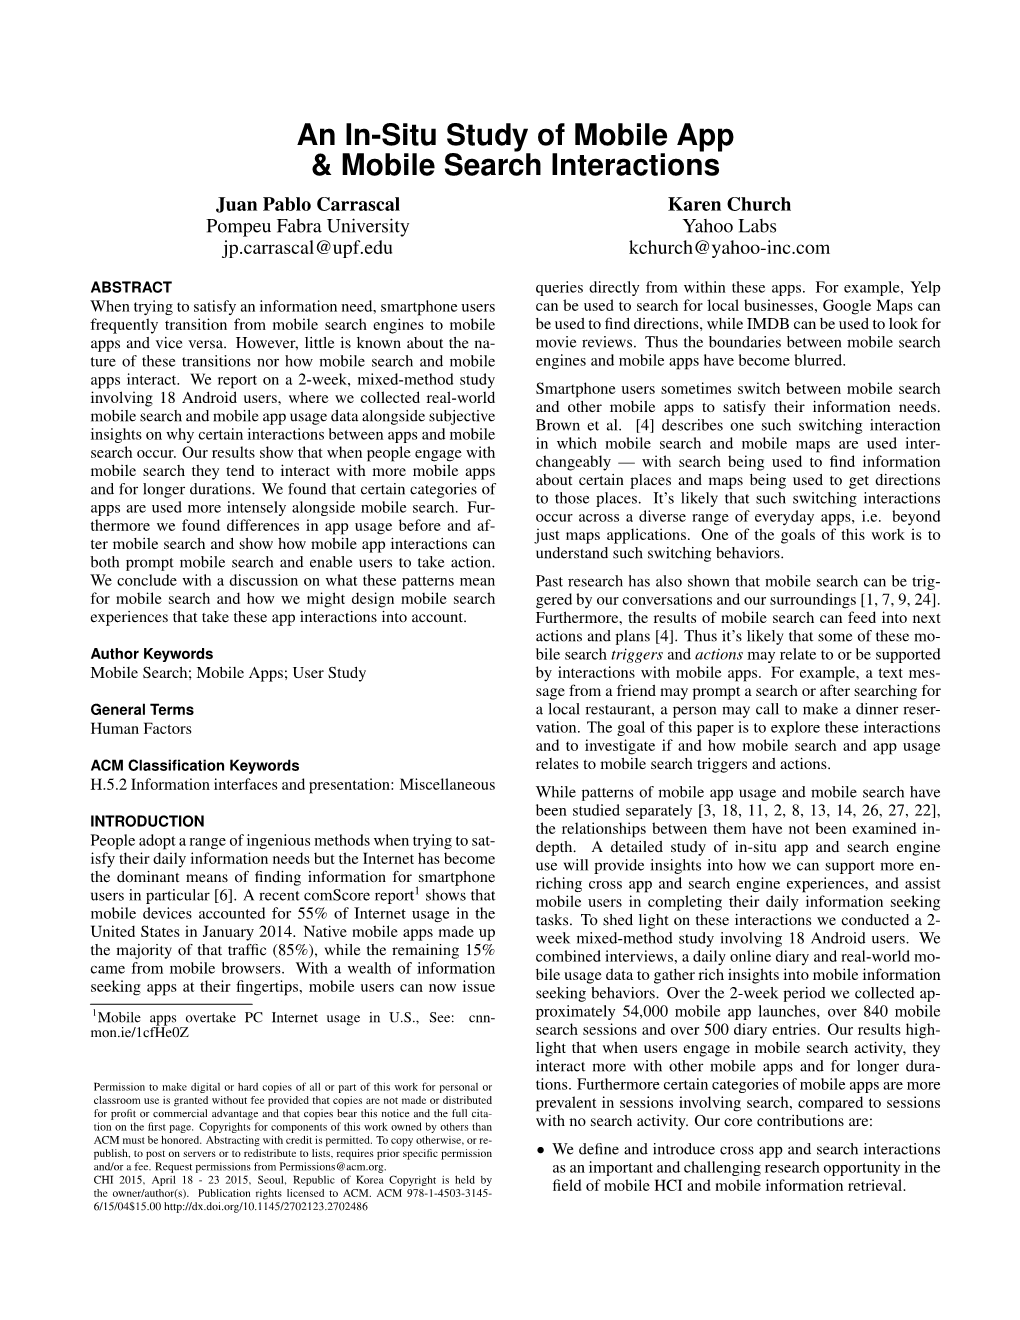 An In-Situ Study of Mobile App & Mobile Search Interactions